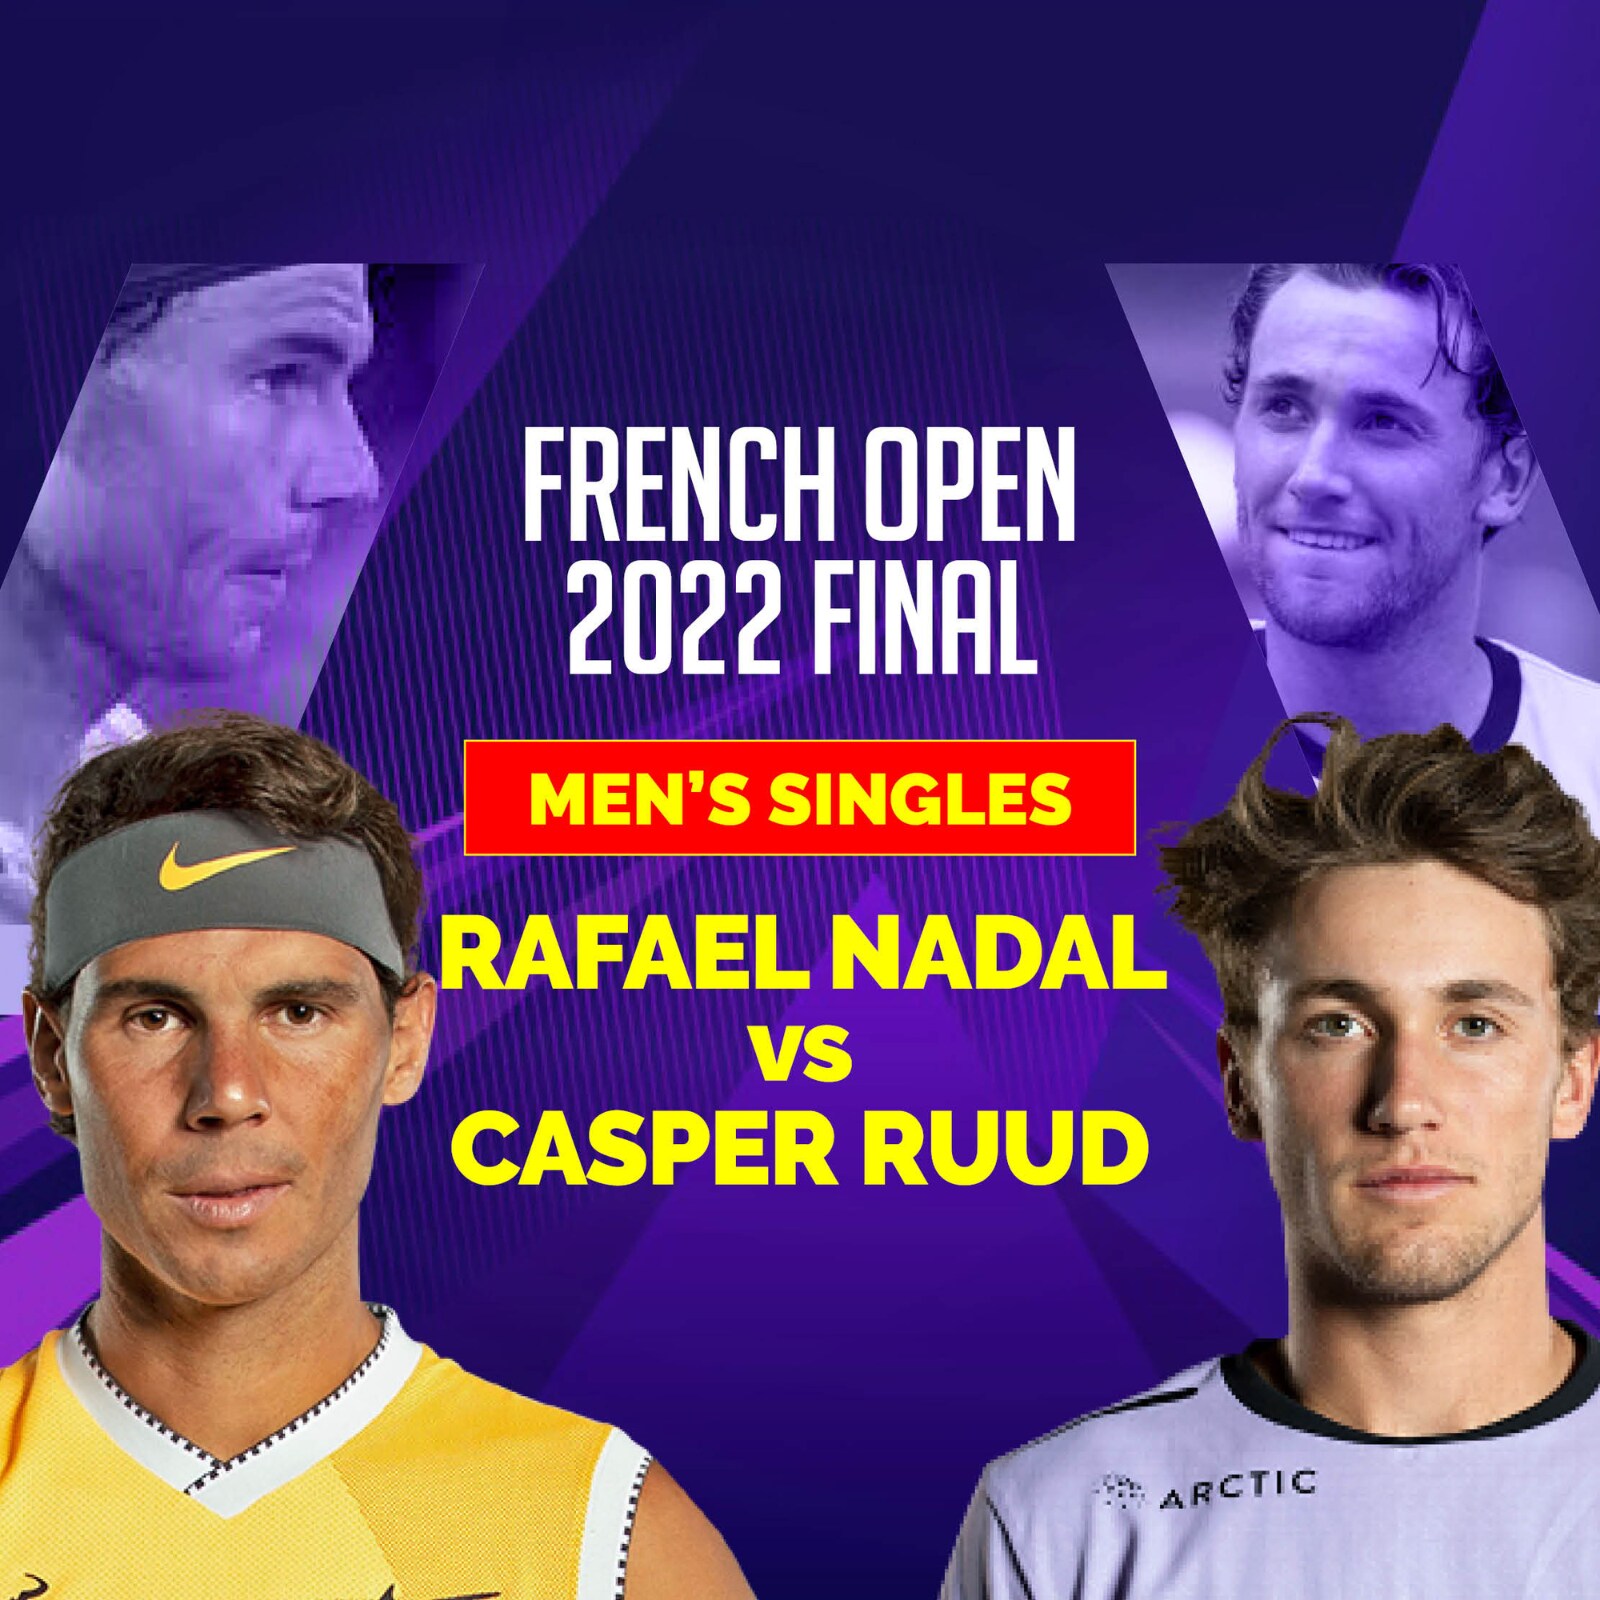 French Open 2022 Mens Singles Final Highlights Rafael Nadal Beats Casper Ruud 6-3,6-3,6-0 to Win 14th Roland Garros Title; Claims Record-extending 22nd Grand Slam